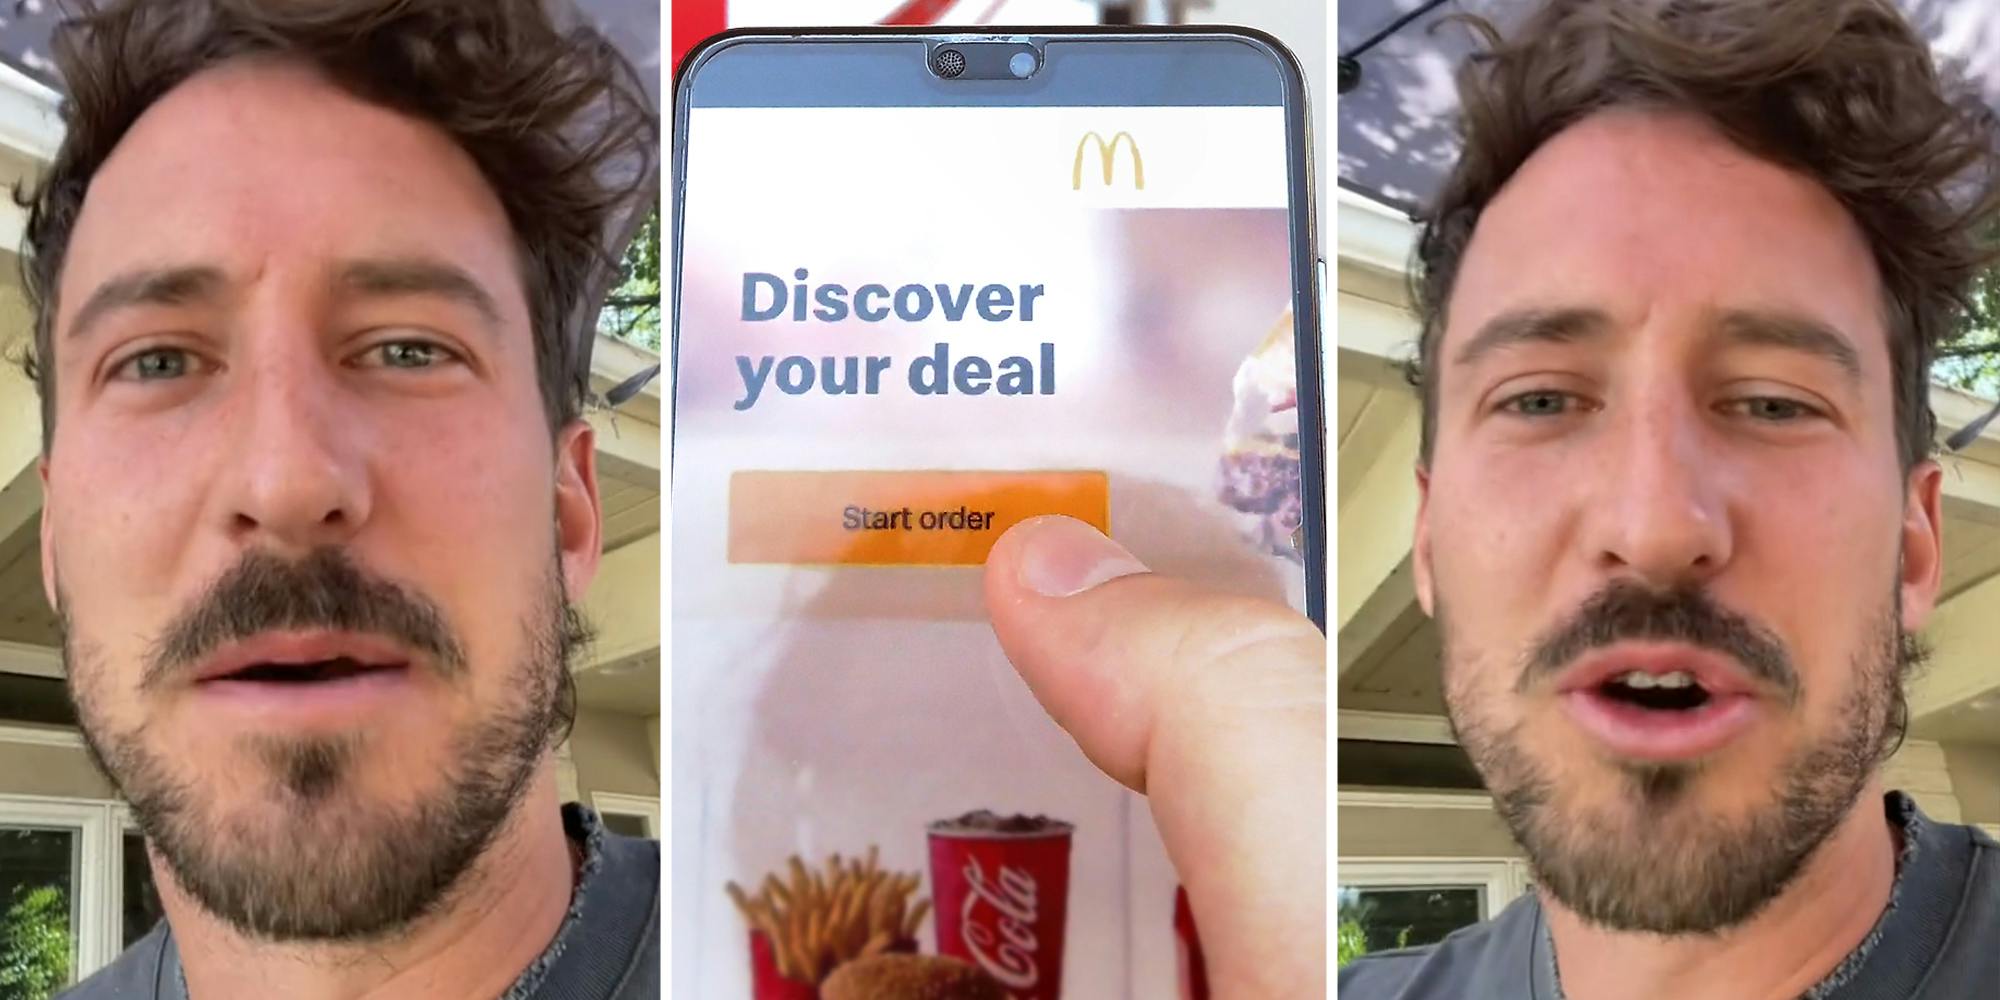 Man talking(l+r), Thumb pressing start order on McDonald's app under "Discover your deal"(c)